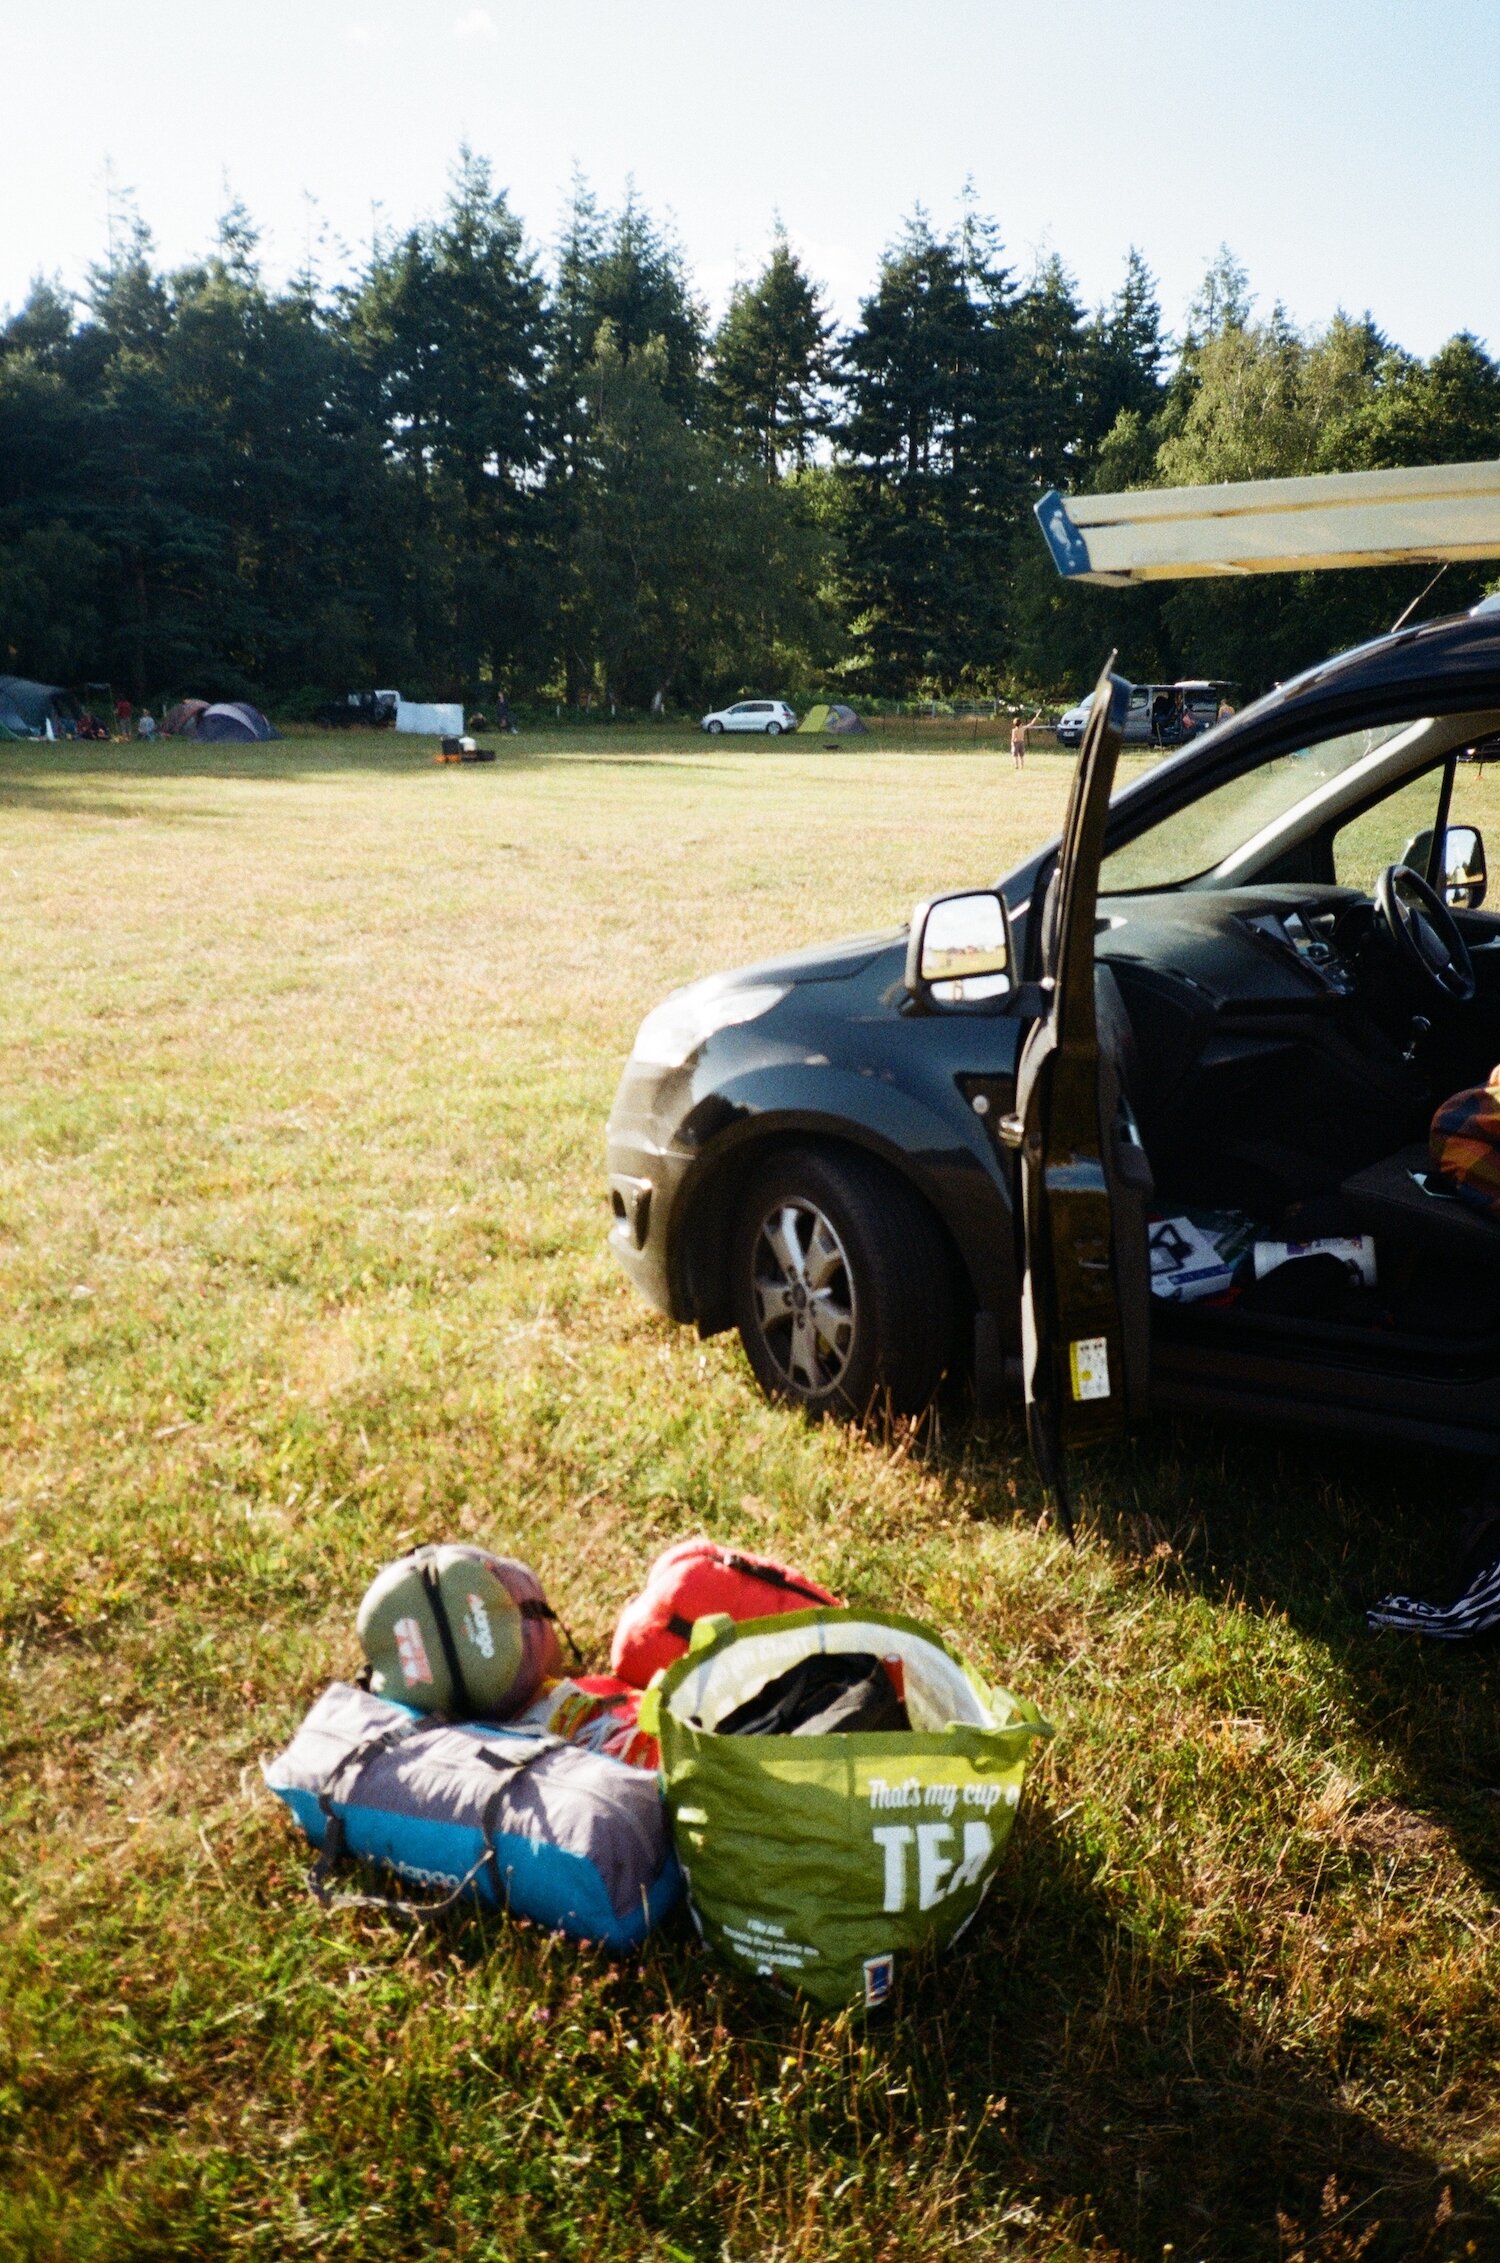 What to pack for a weekend camping trip